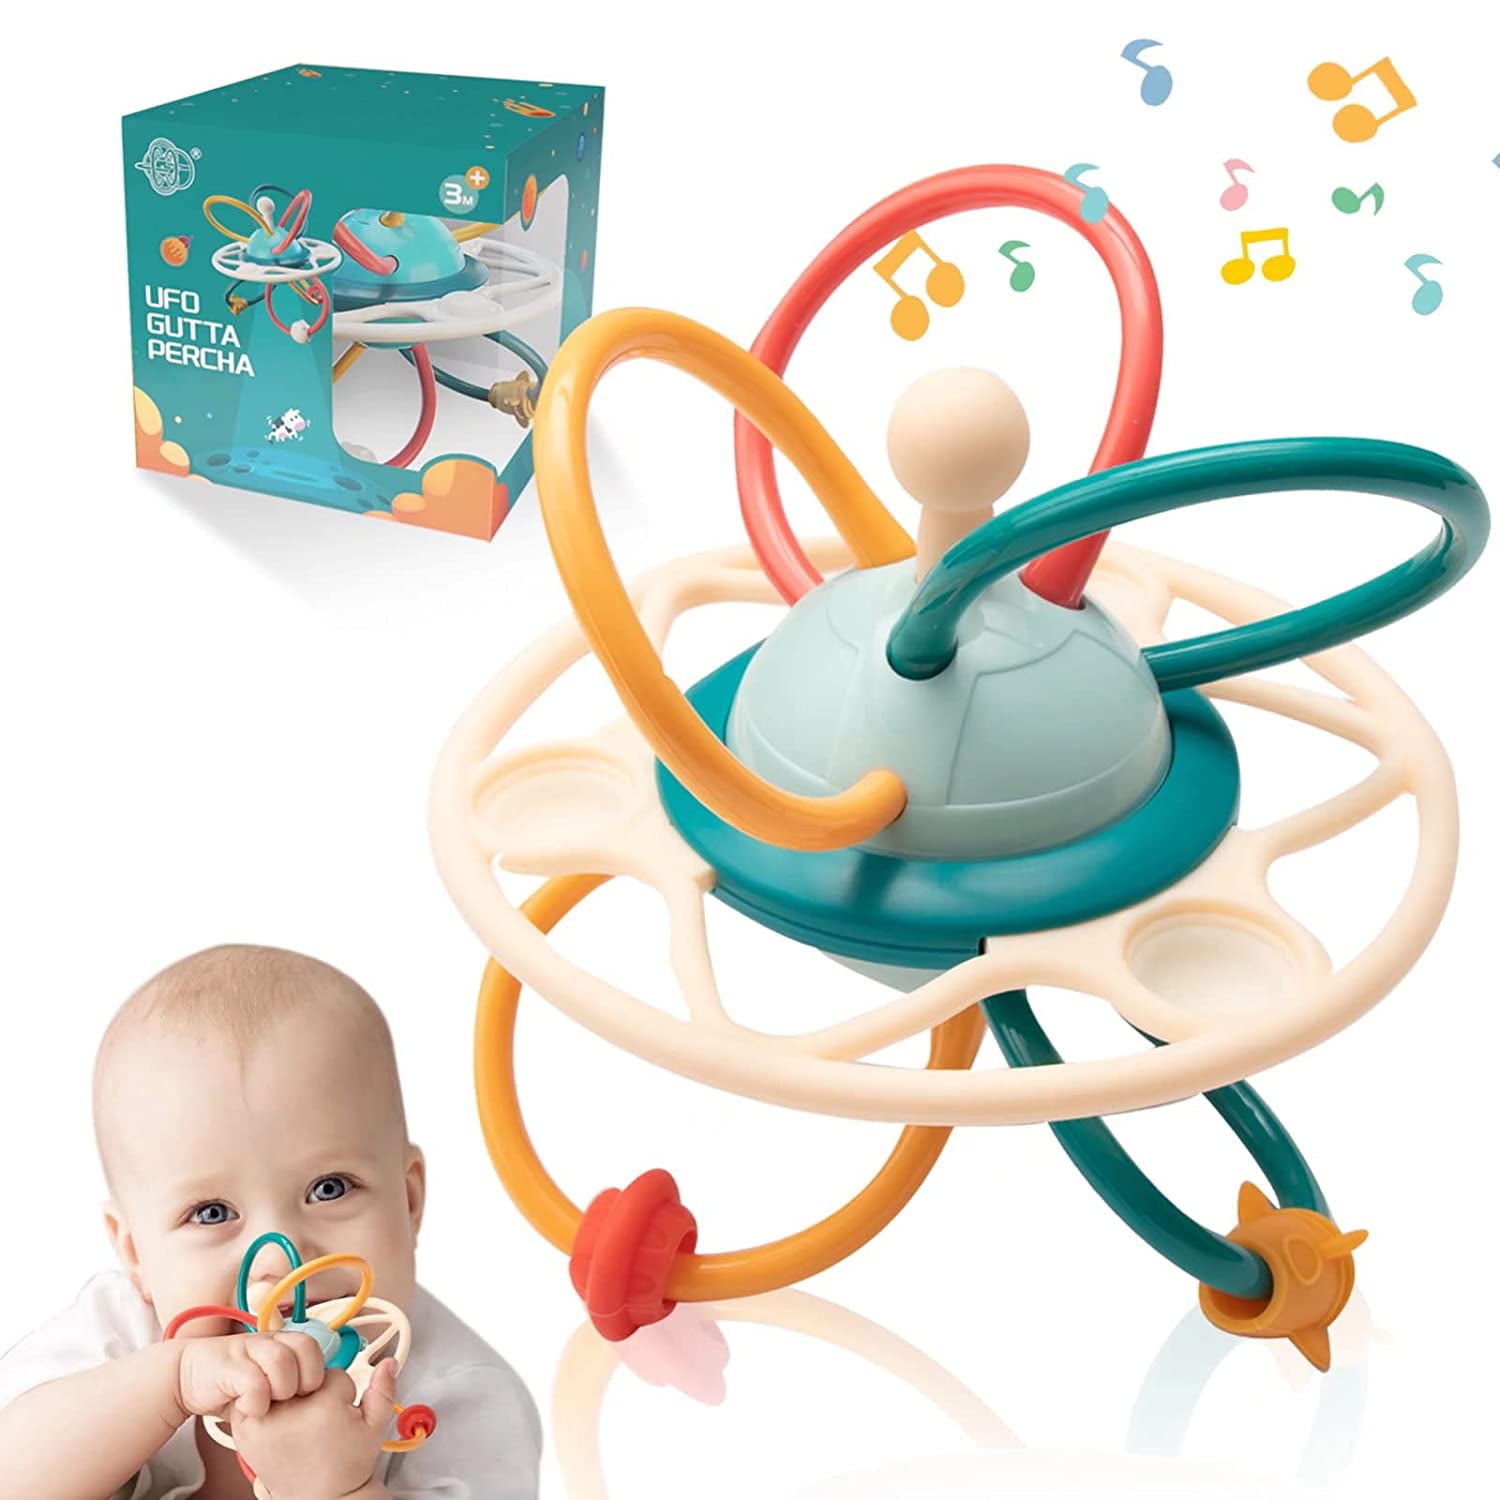 Baby Rattle & Baby Teething Toys for Babies 0-6-12 Months Baby Teether Teethers for Babies Infant Baby Toys 3-6 Months 6 to 12 Months Baby Boy Girl Einstein Toys Stuff Gift Gifts Sensory Toys 